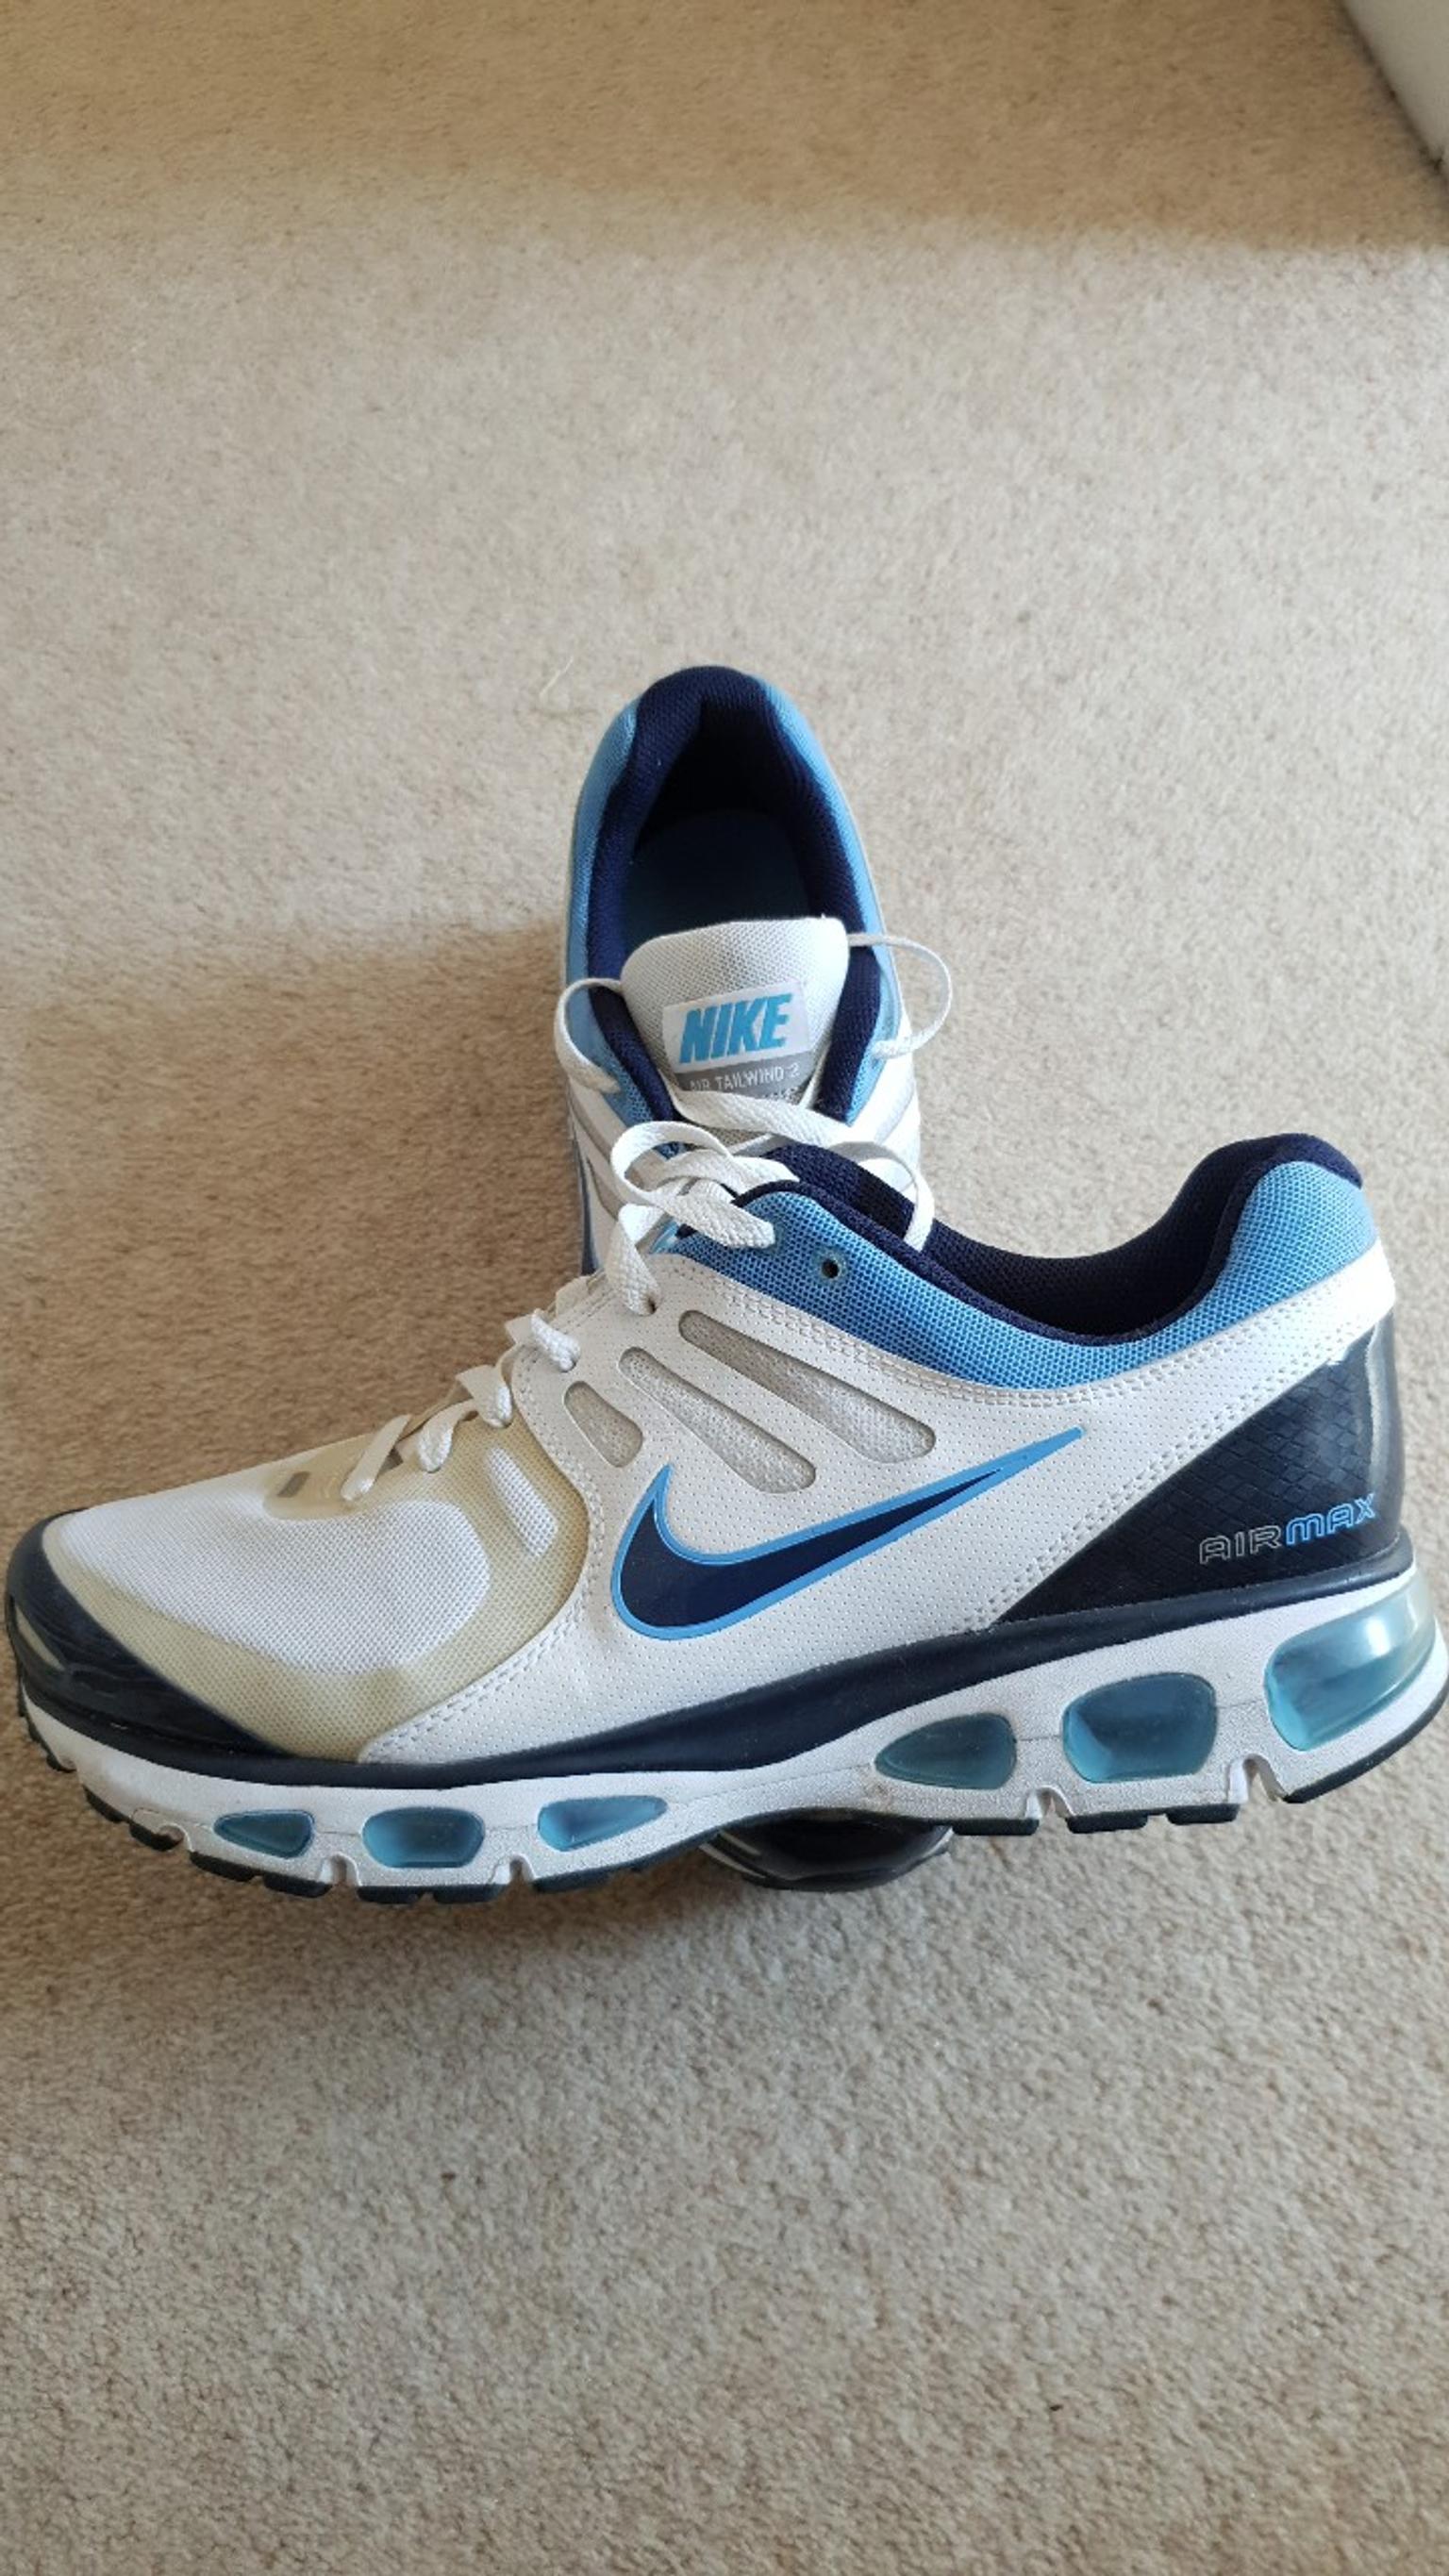 Nike Air Tailwind 2 Trainers in LN7 Lindsey for £15.00 for sale | Shpock